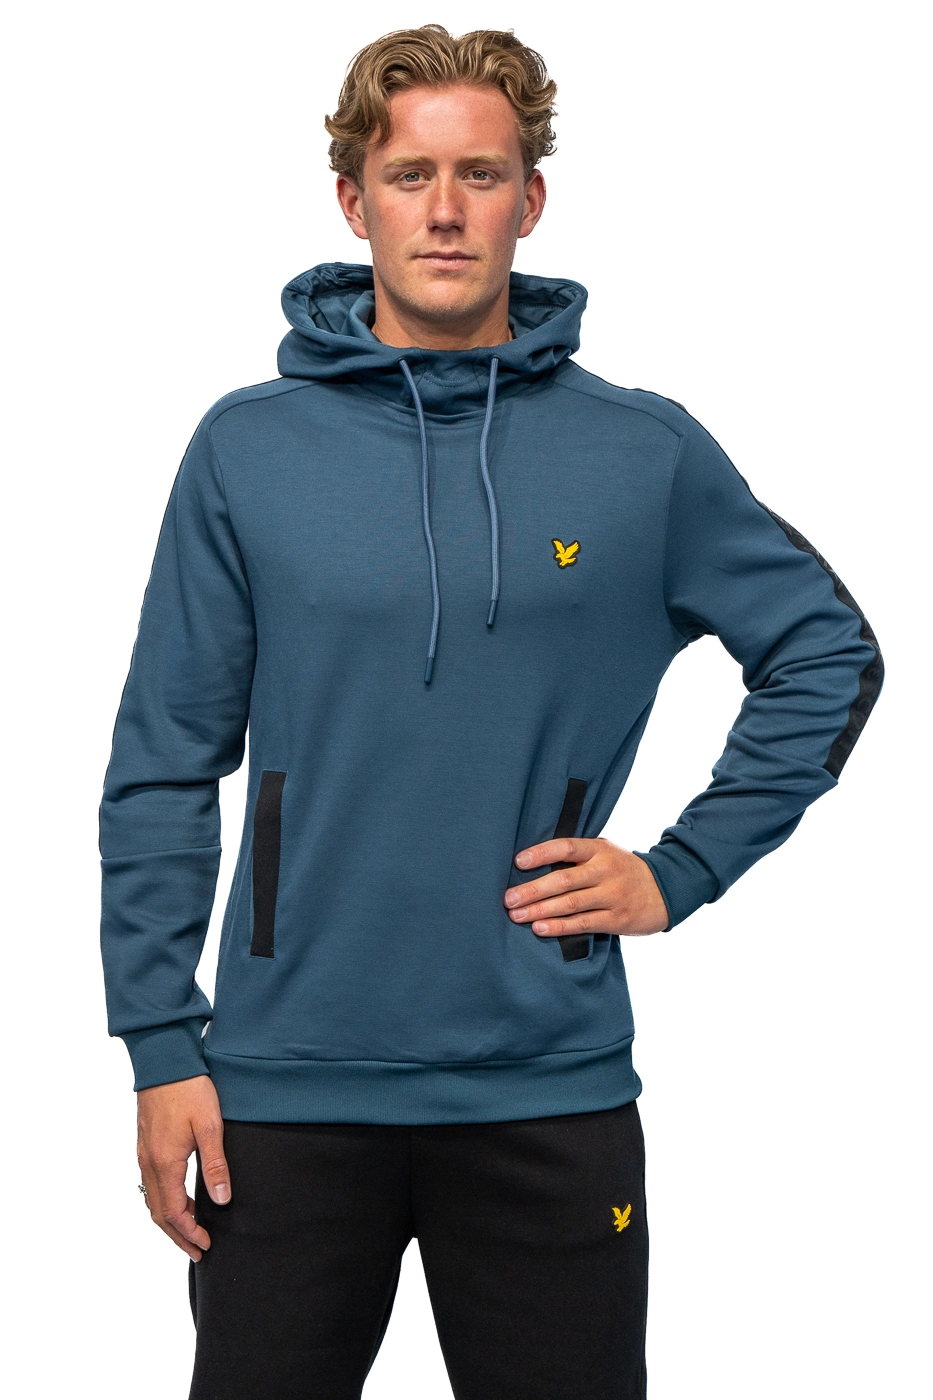 Lyle and Scott Pocket Branded Sweat Hoodie casual sweater heren